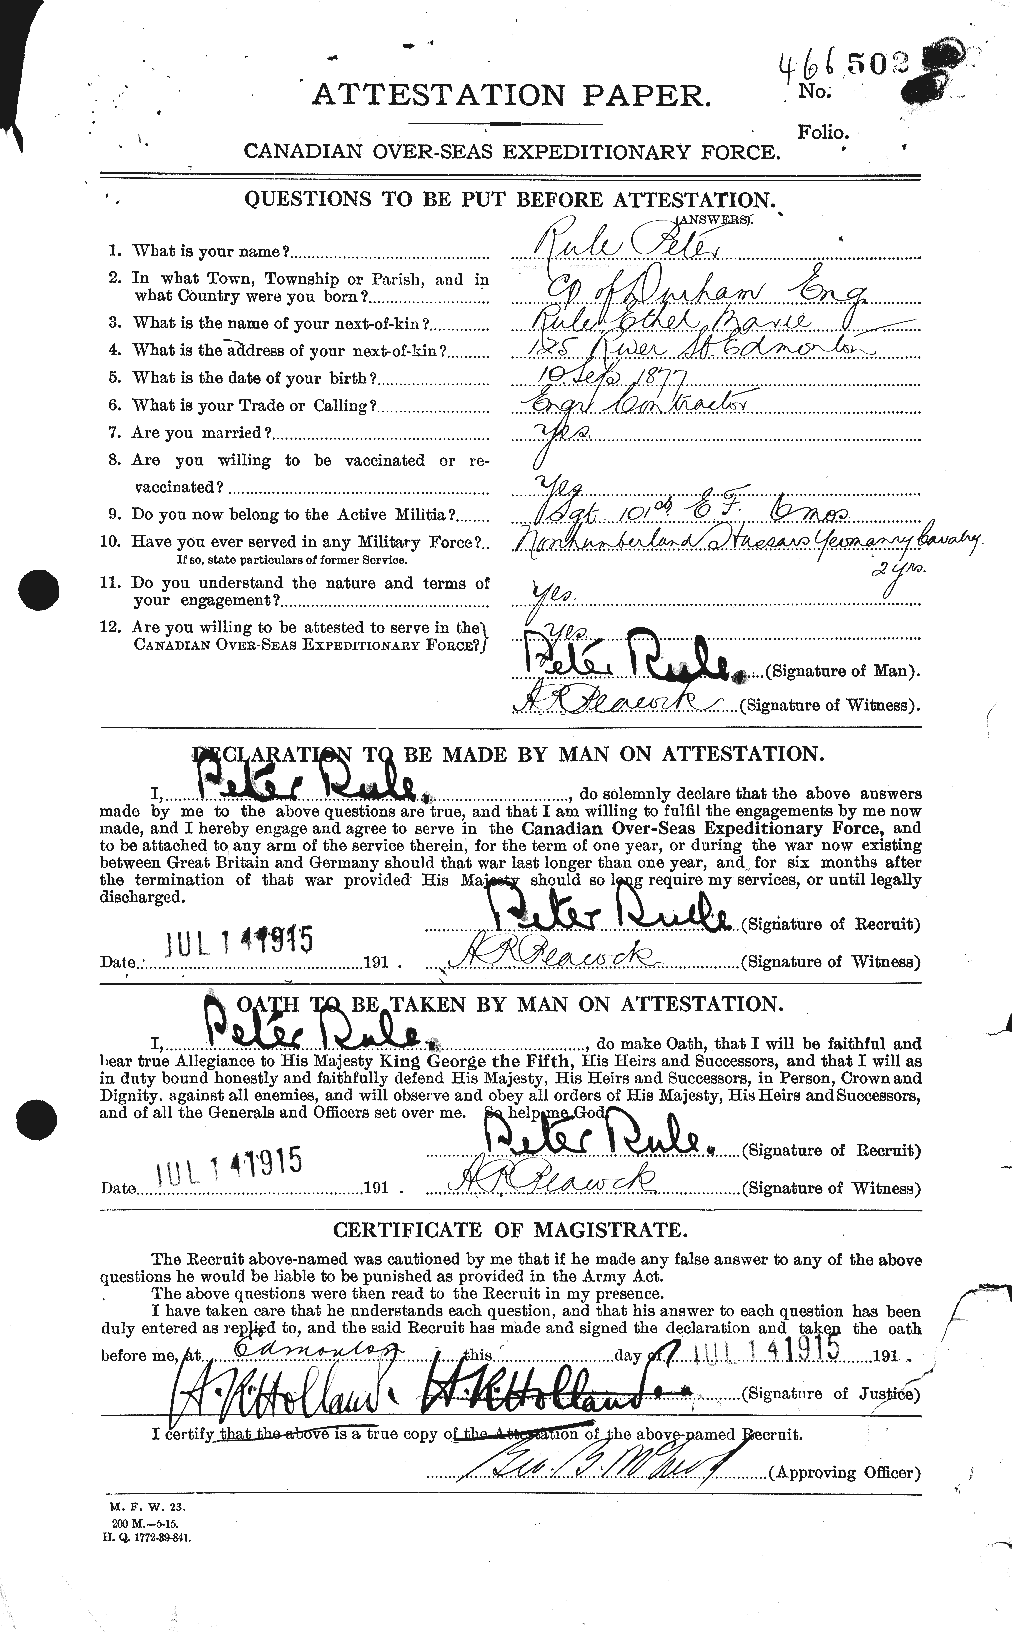 Personnel Records of the First World War - CEF 617336a